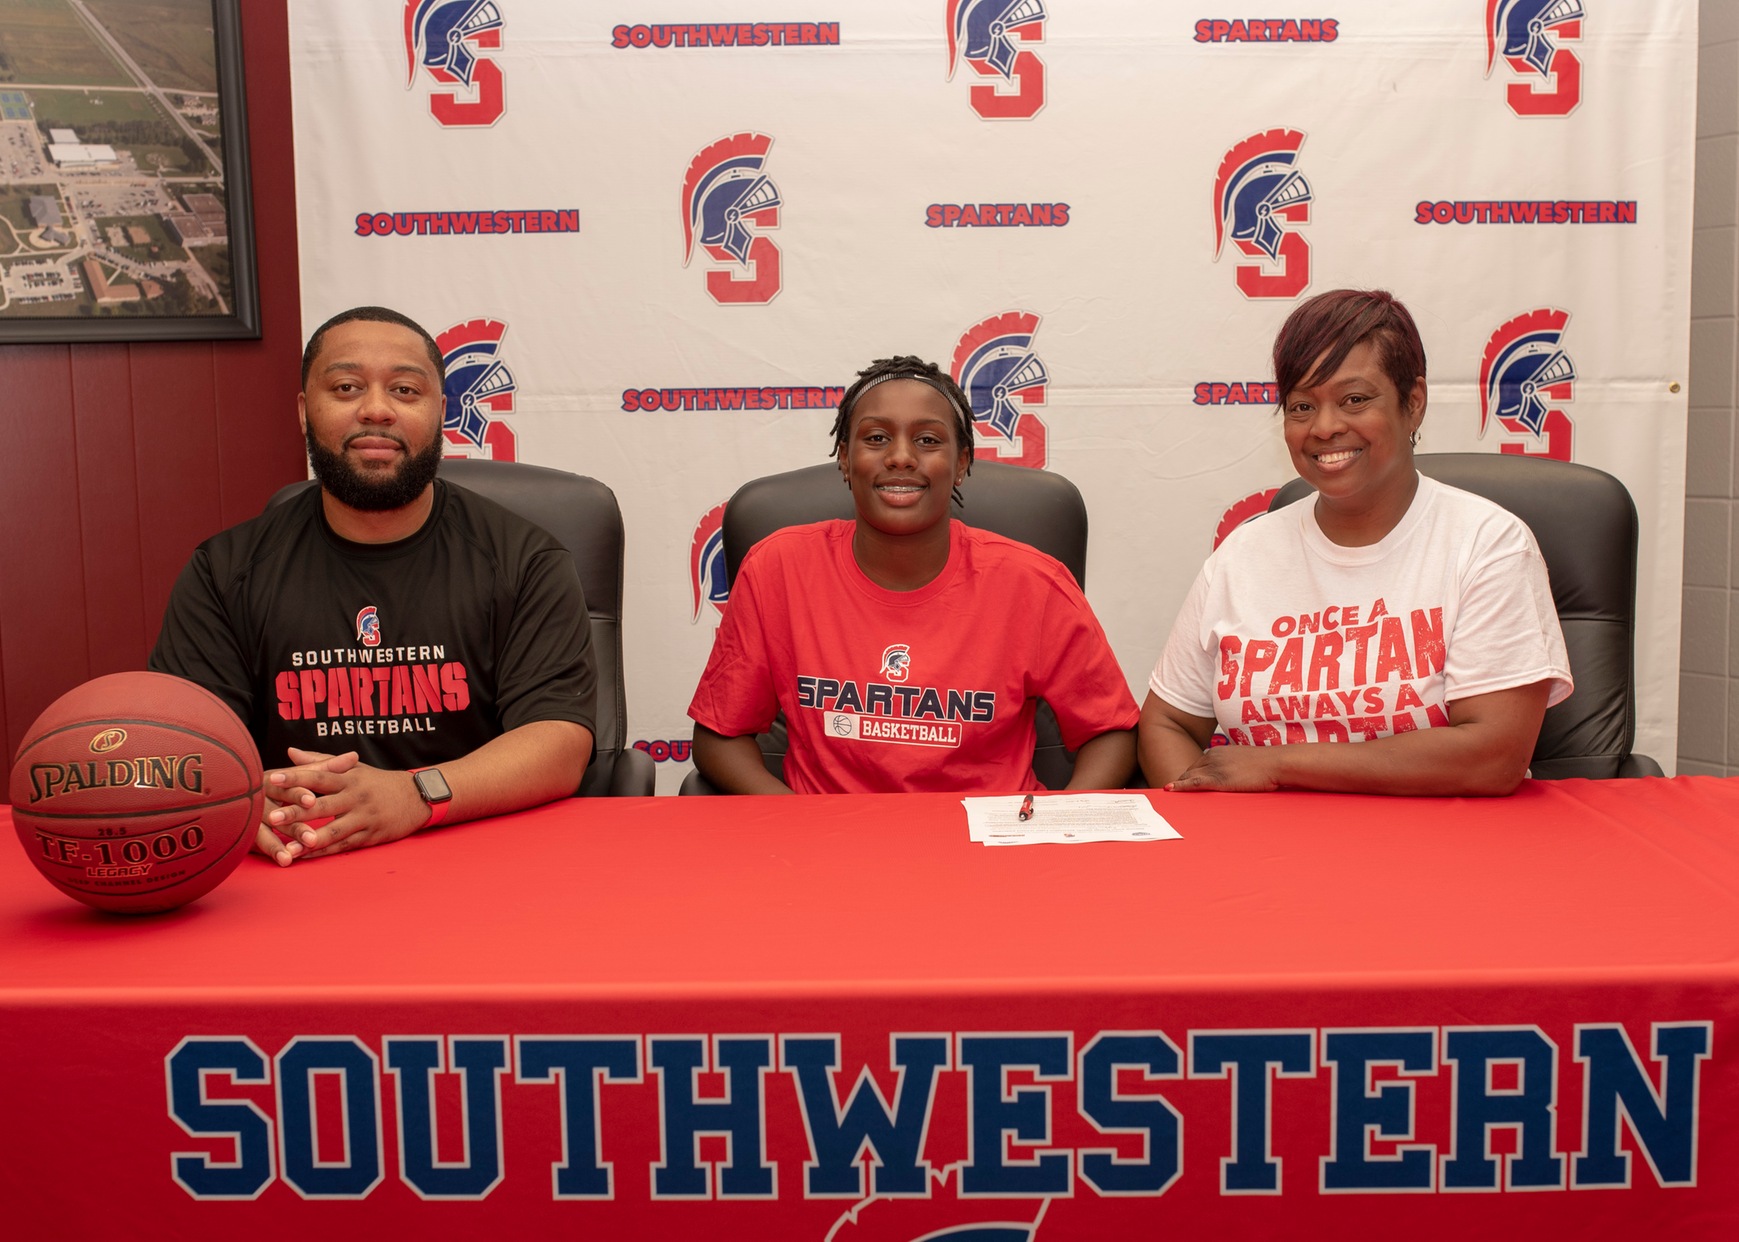 Kaylynn Tucker of Omaha signs her National Letter of Intent to join the Southwestern women's basketball team in 2019-20.